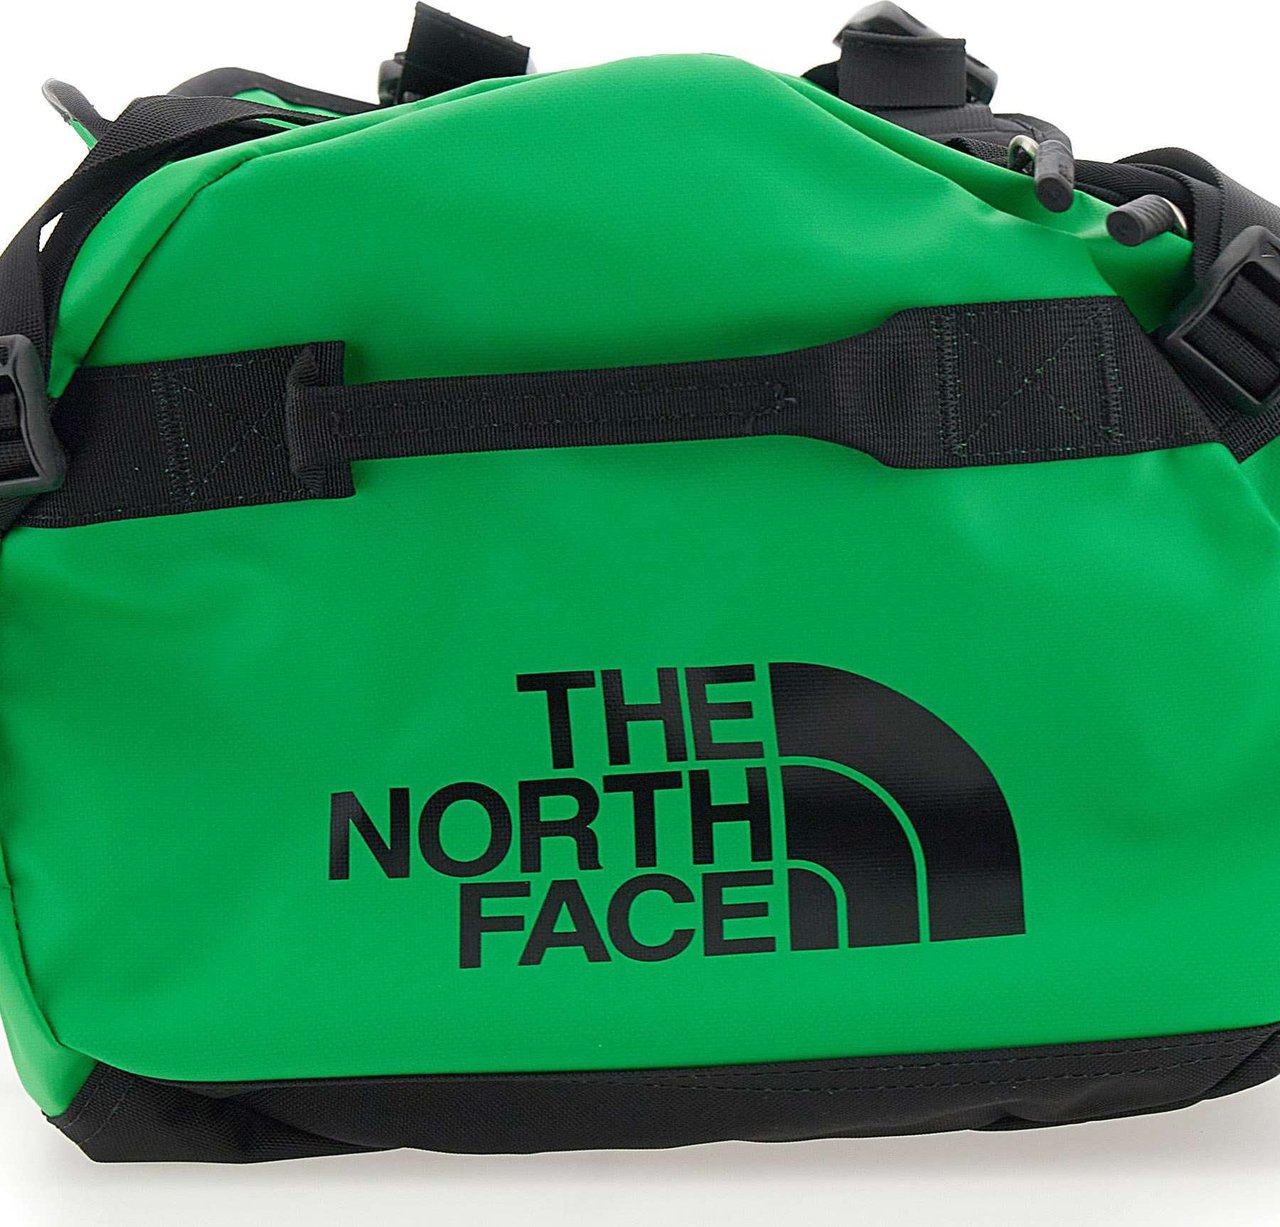 The North Face Suitcases Black Zwart